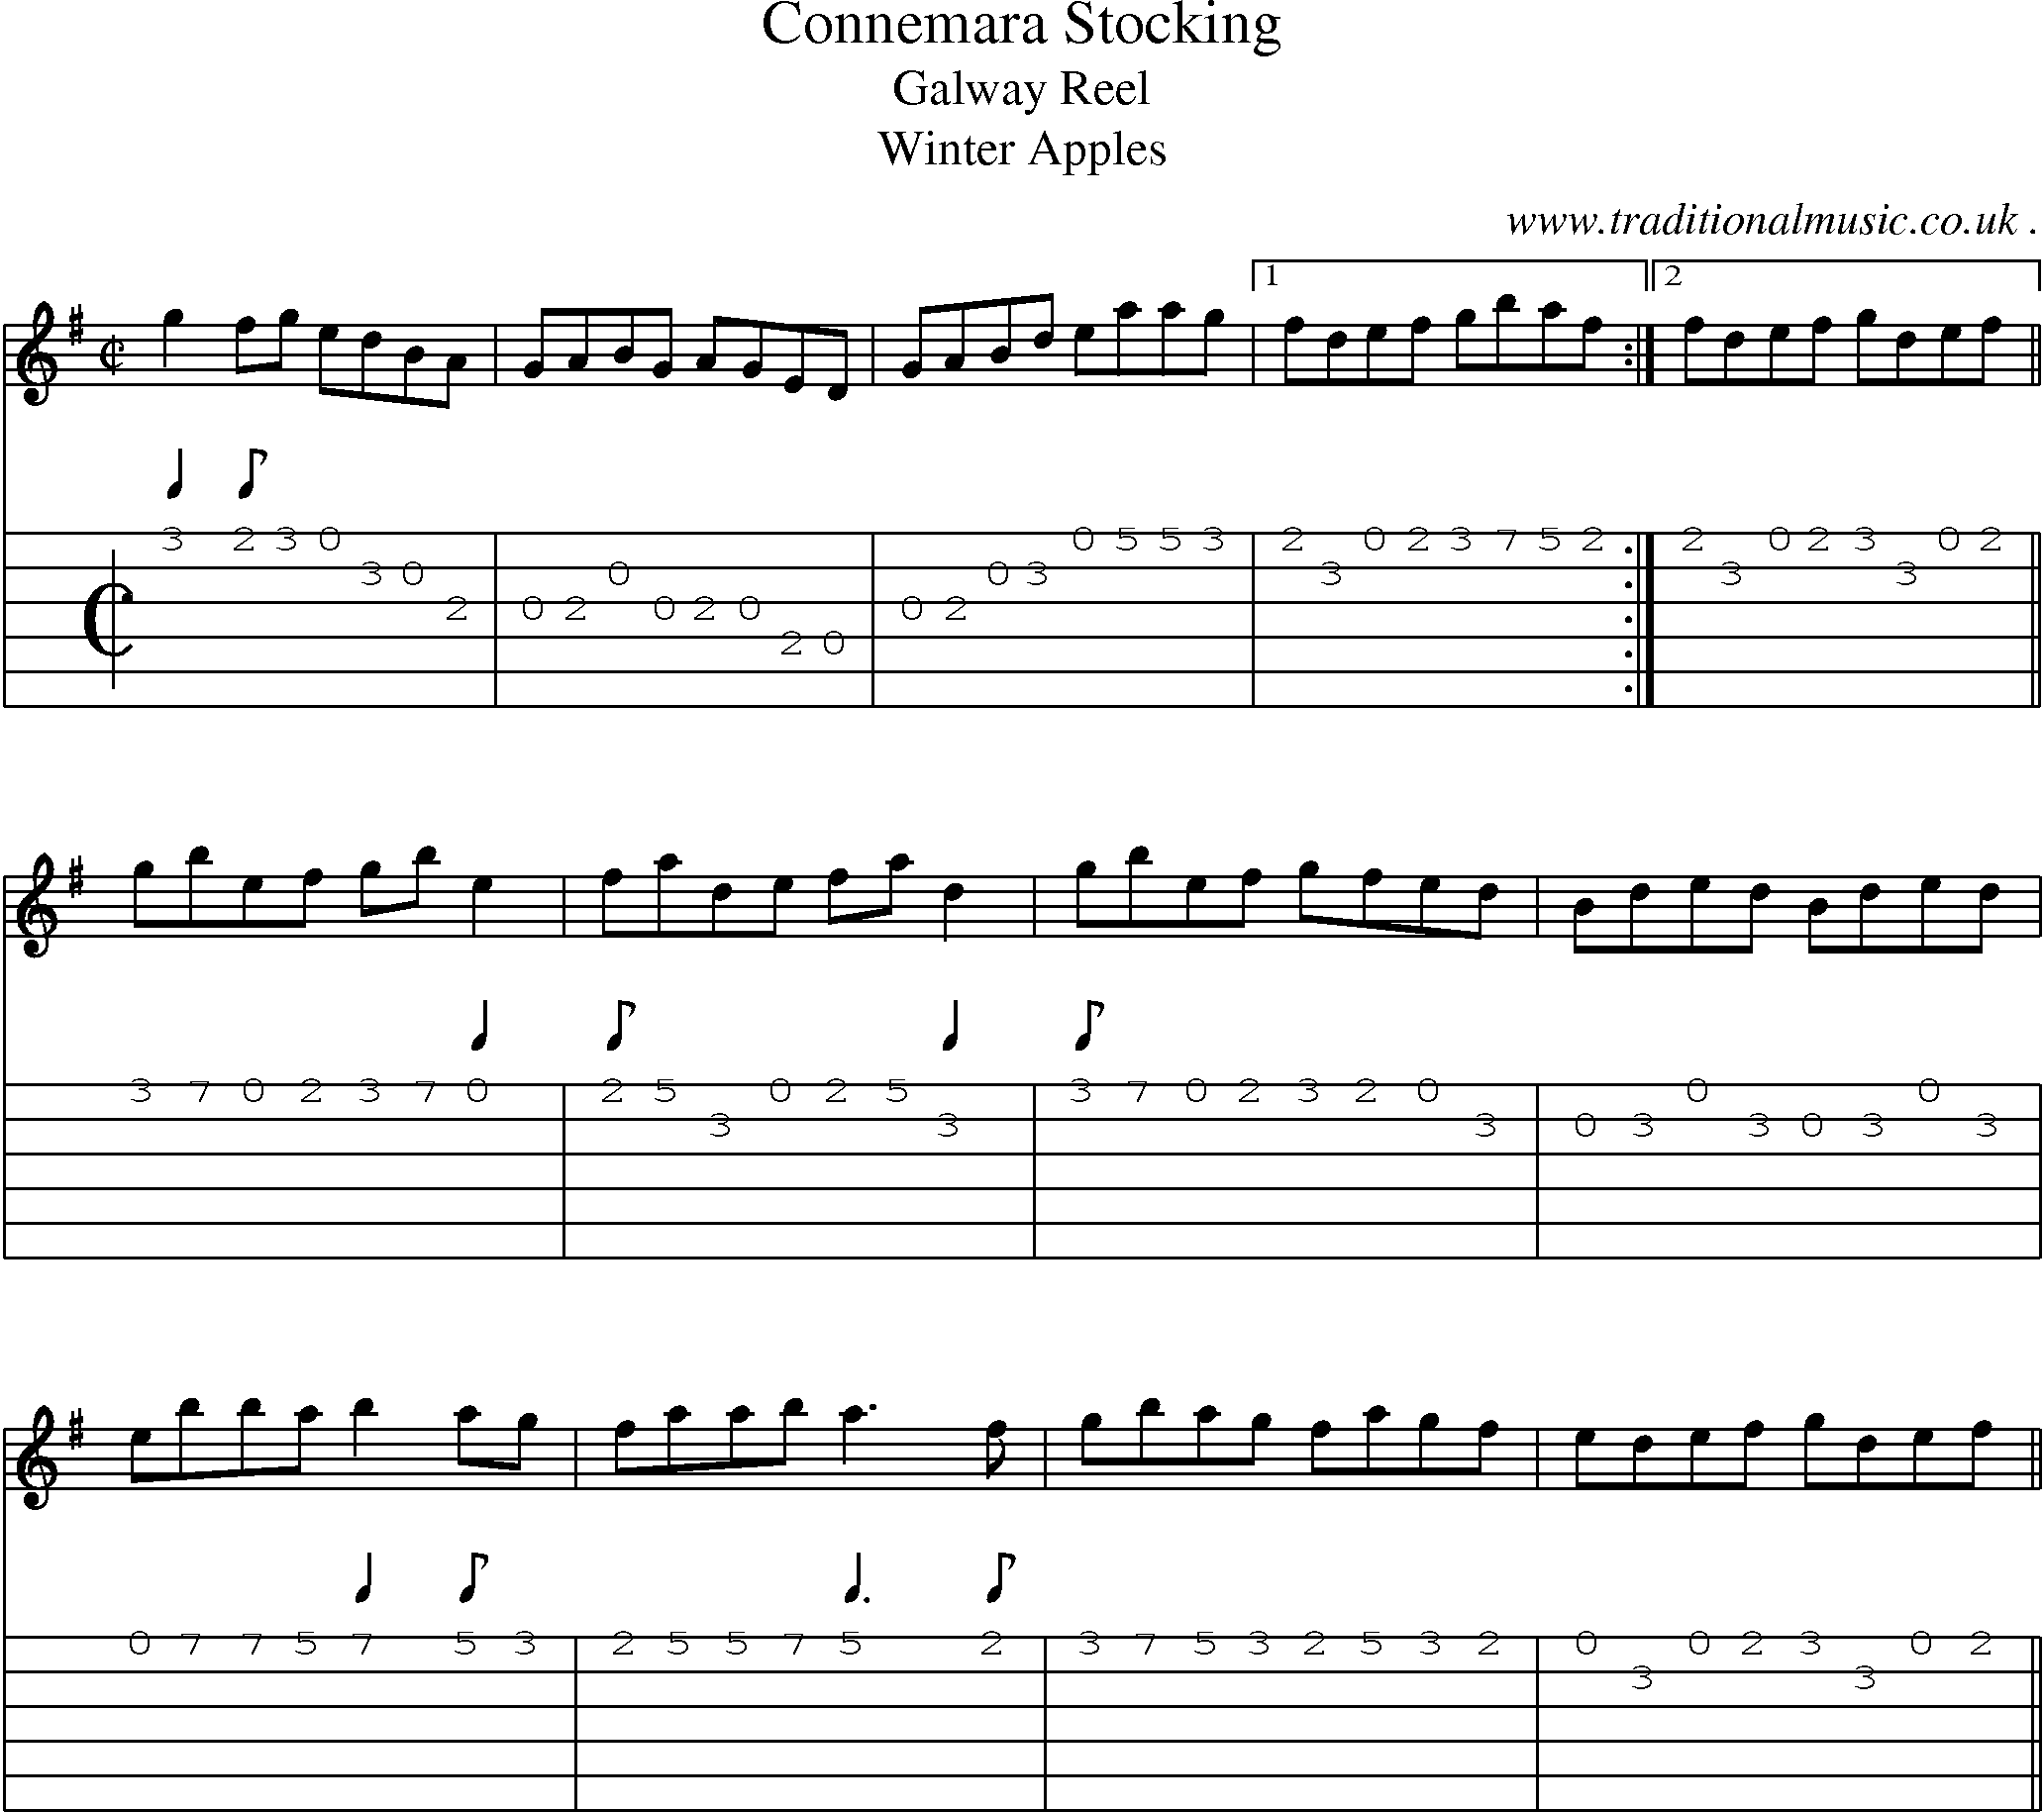 Sheet-Music and Guitar Tabs for Connemara Stocking